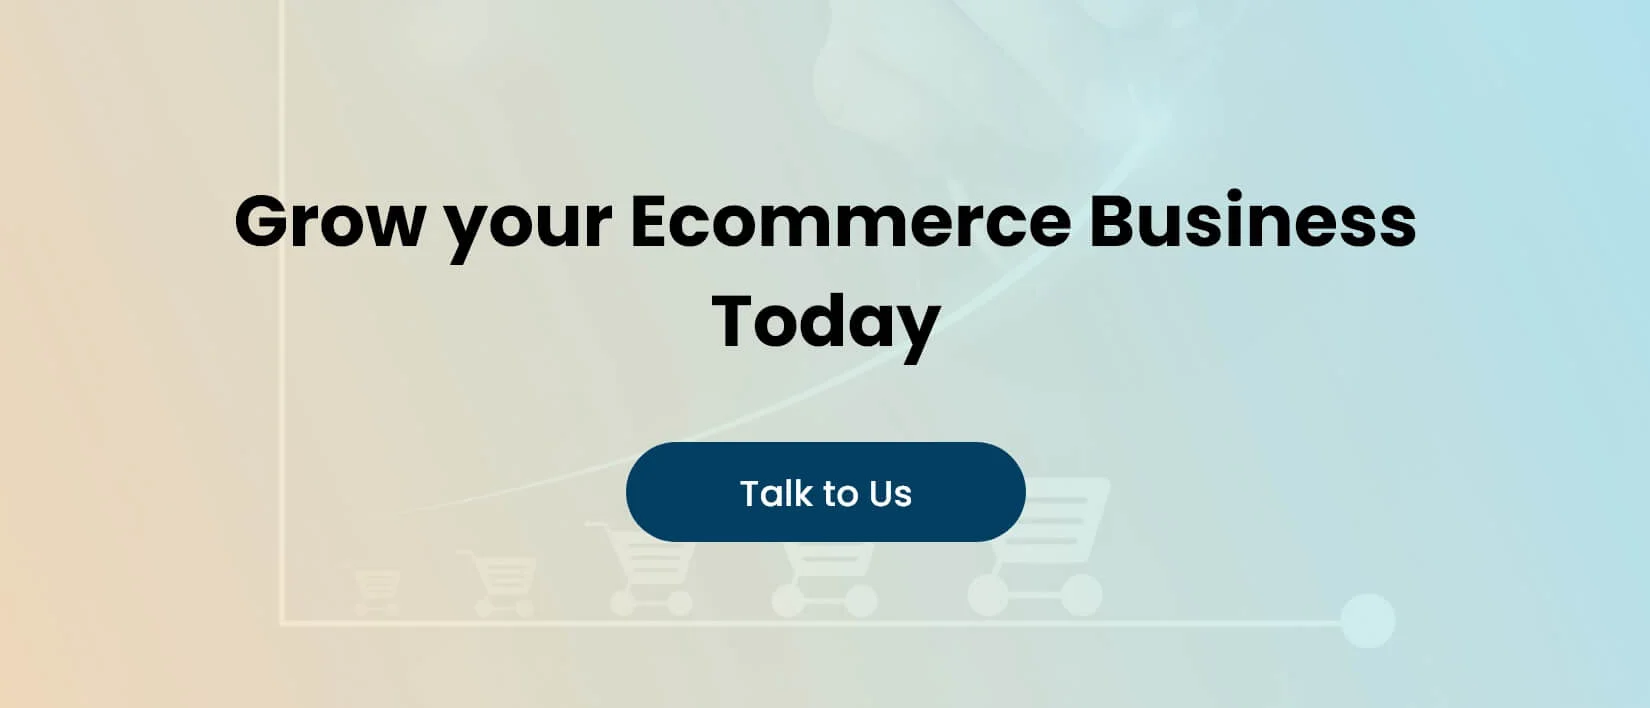 Grow your Ecommerce Business Today